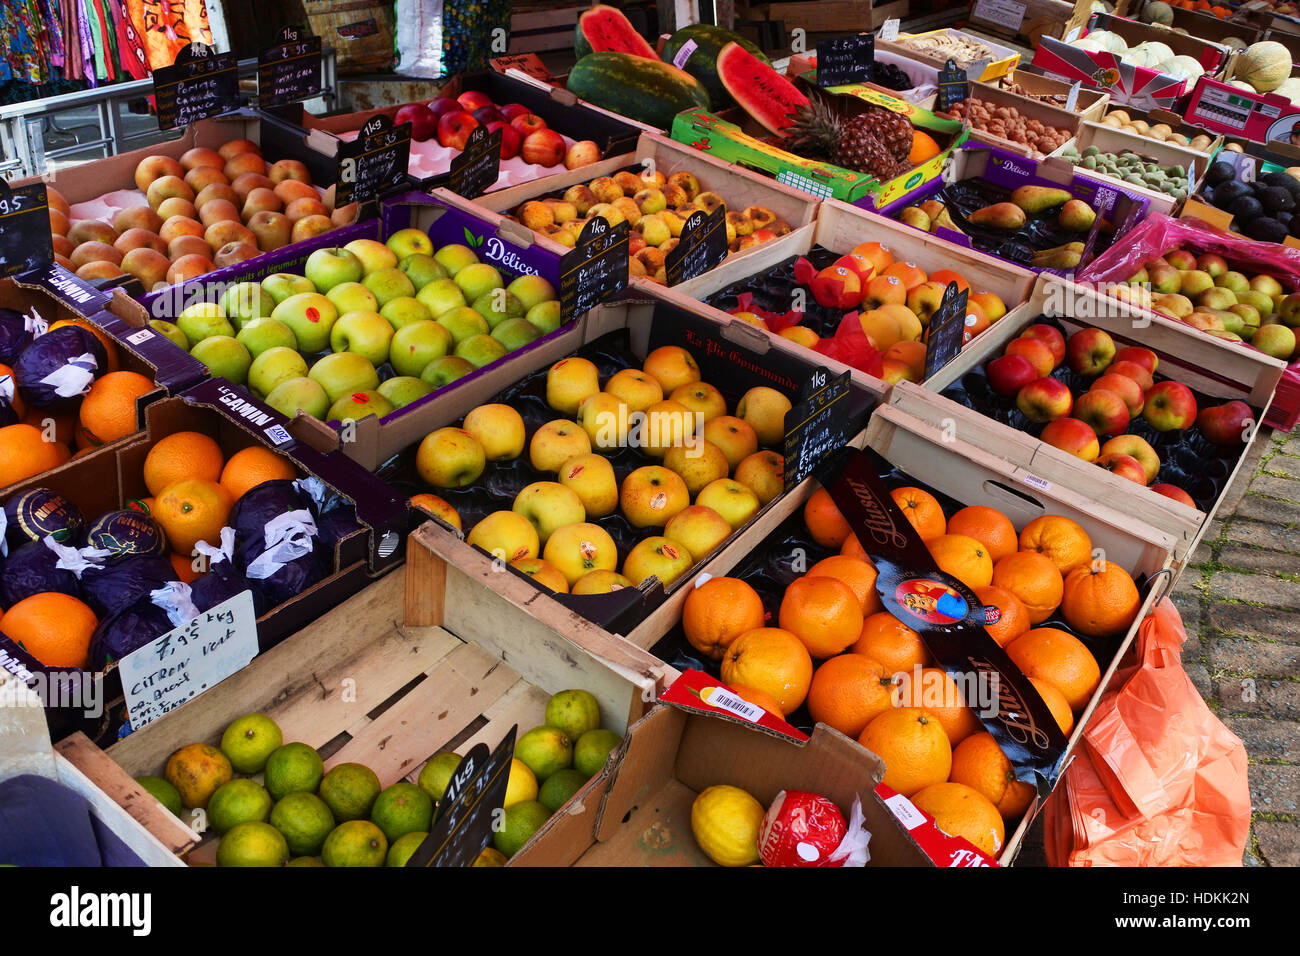 Fruit and vegetable stall - John Gollop Stock Photo